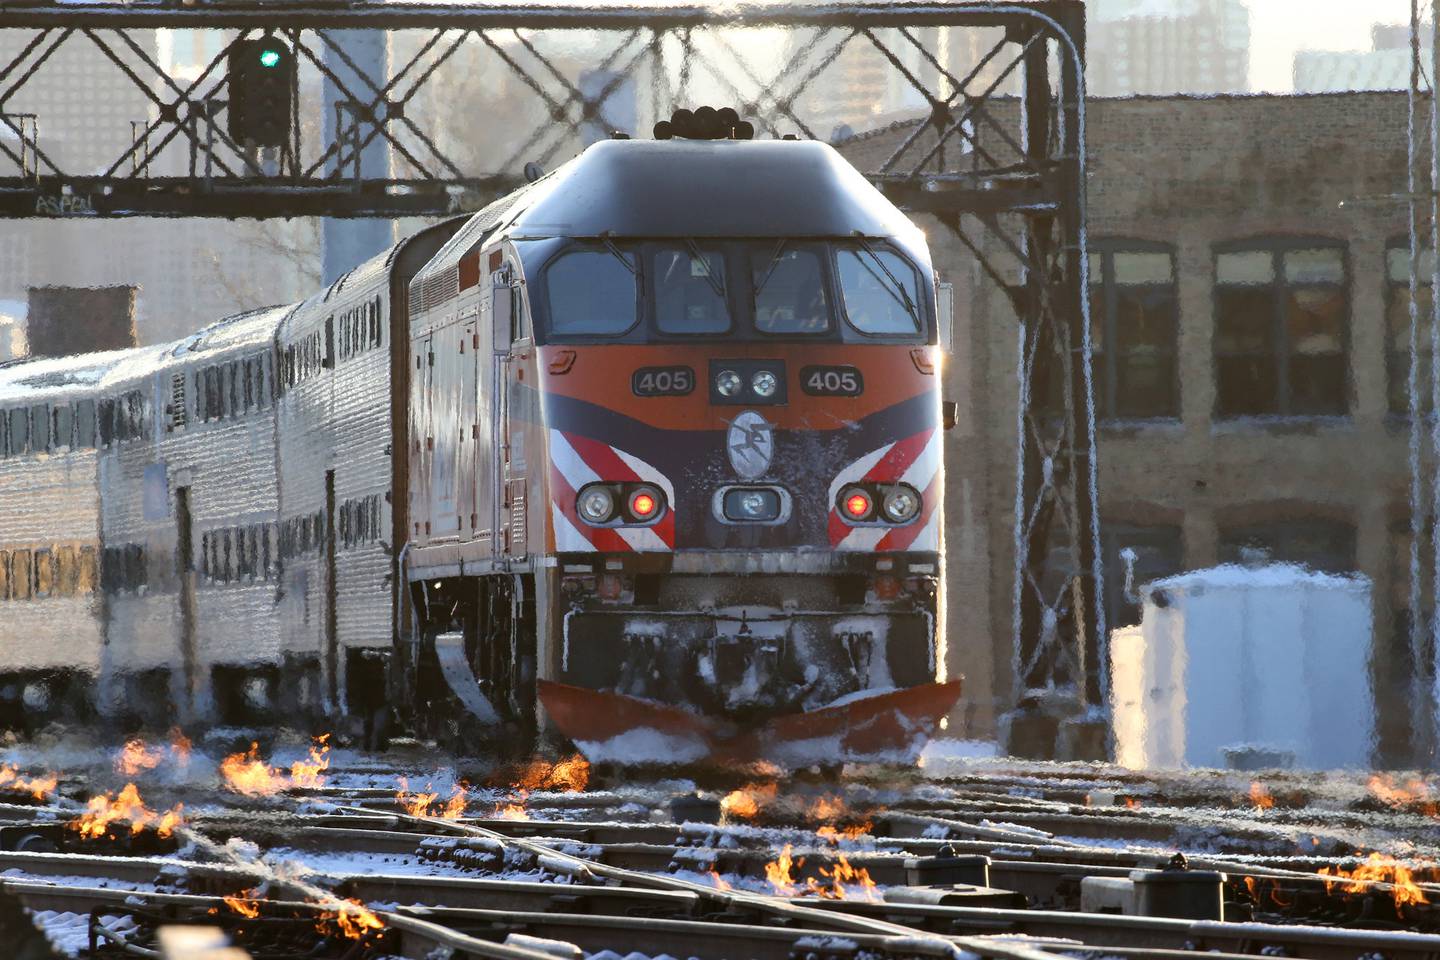 With temperatures in the single digits train crews ignite burners along the switches for tracks used by Amtrak trains near Western and Grand Avenues on the morning of Nov. 12, 2019.